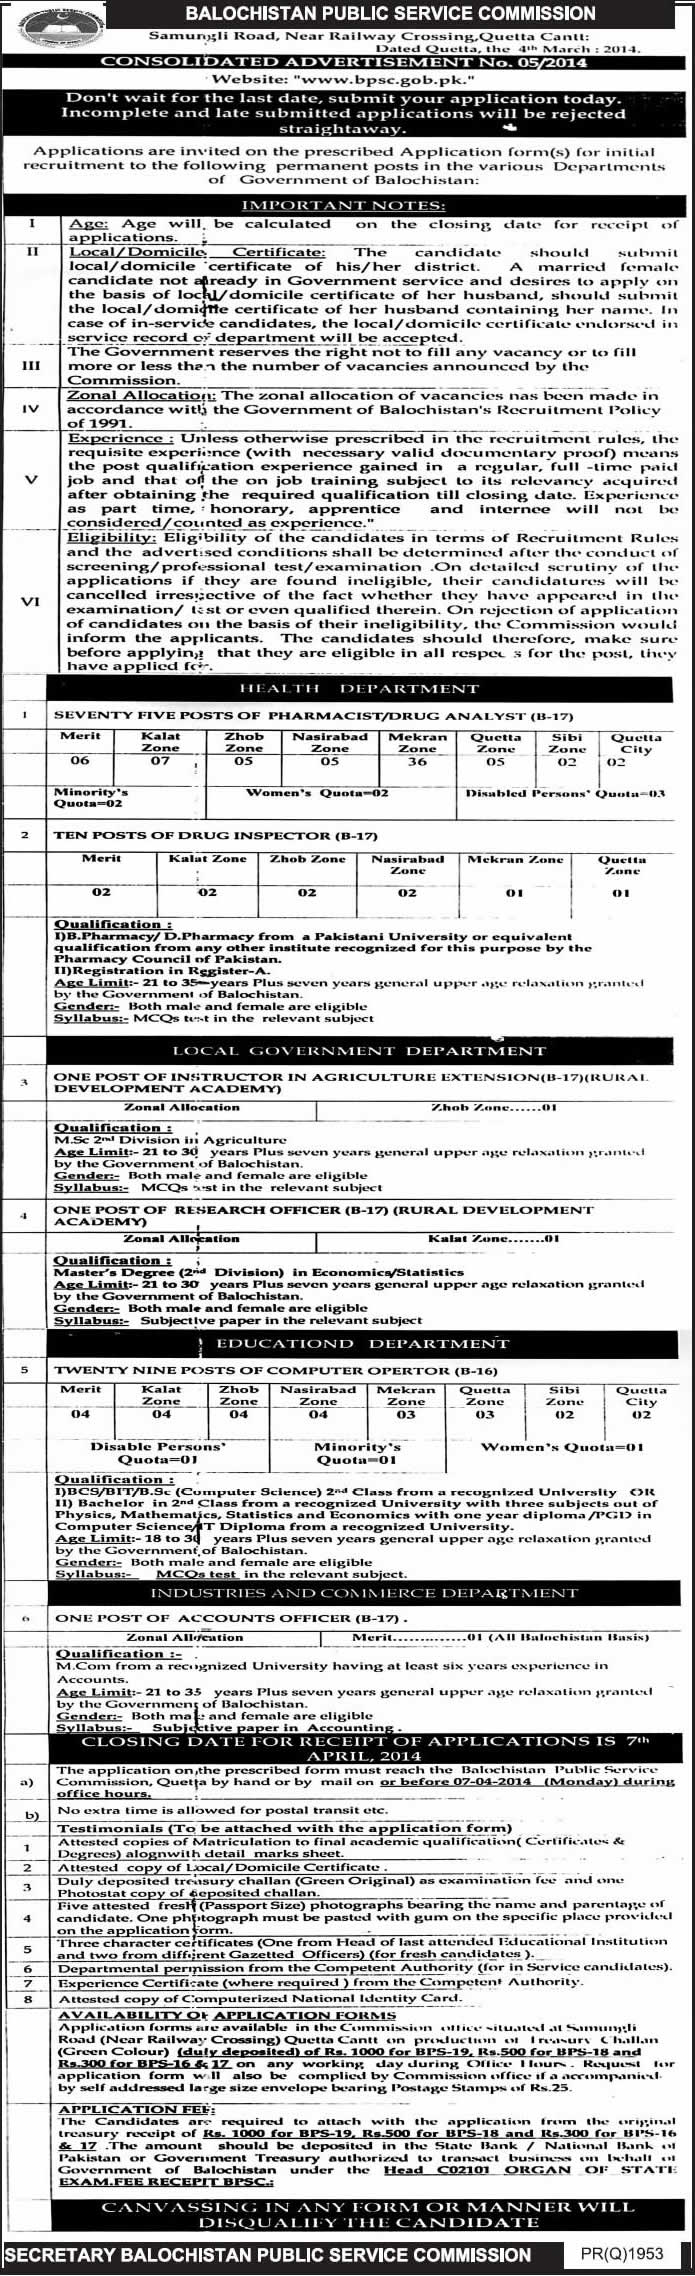 BPSC Jobs 2014 March Advertisement No 05/2014